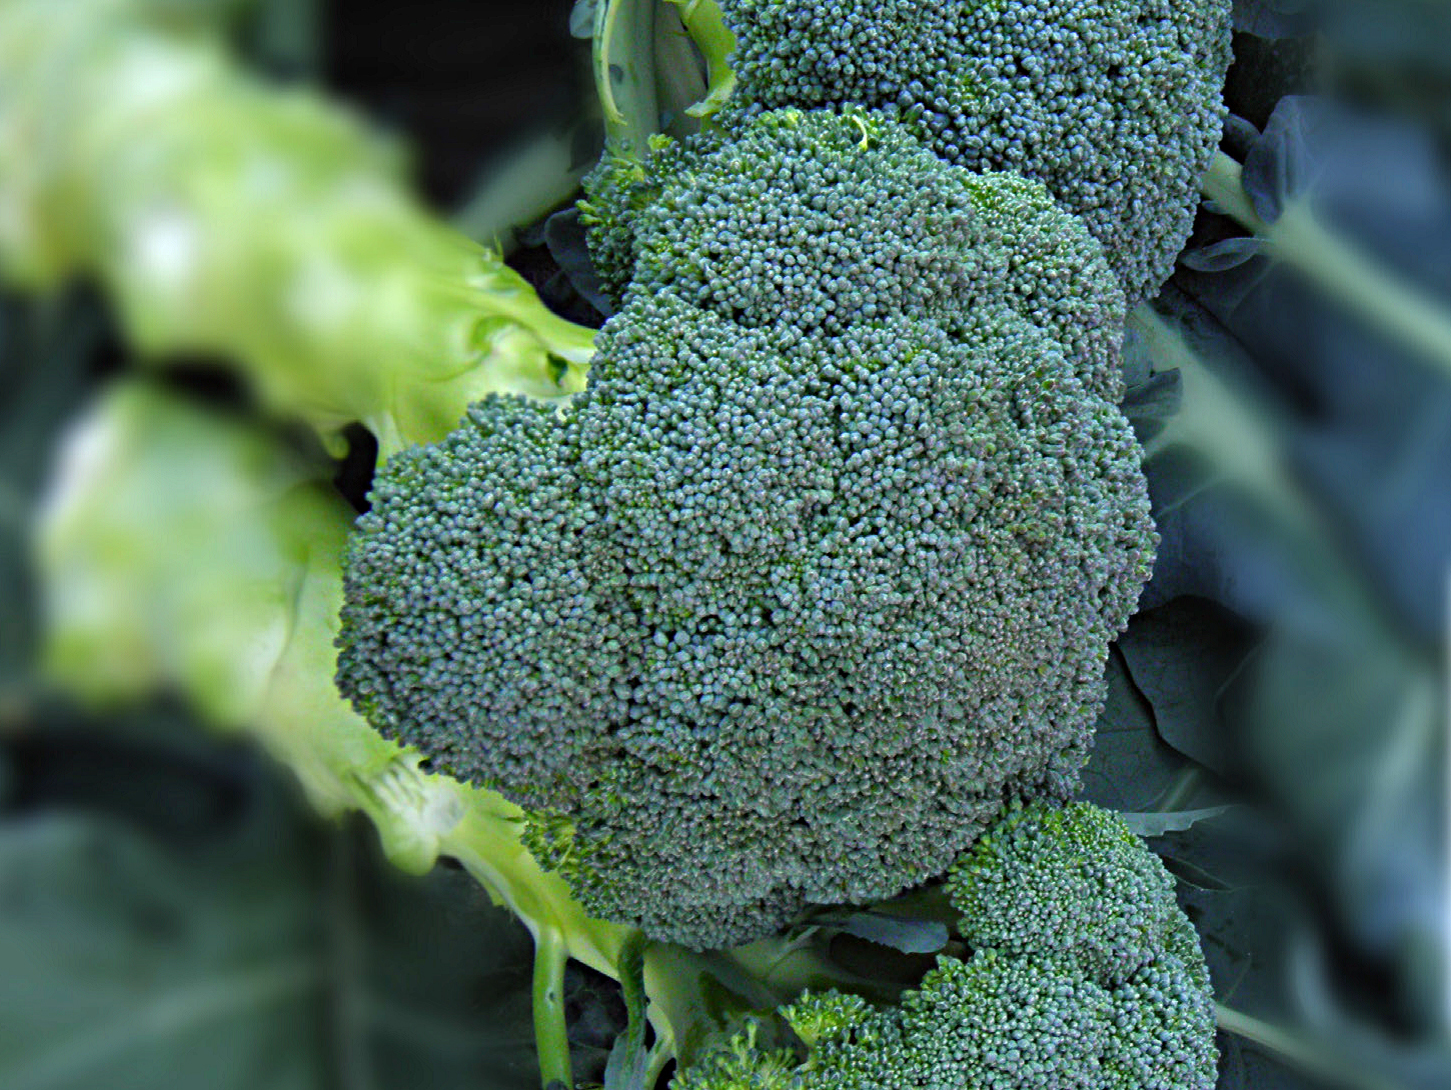 Asteroid is a broccoli from Harris Seeds. The heads are a dark green and the plants mature in 77 days from transplants. HARRIS SEEDS